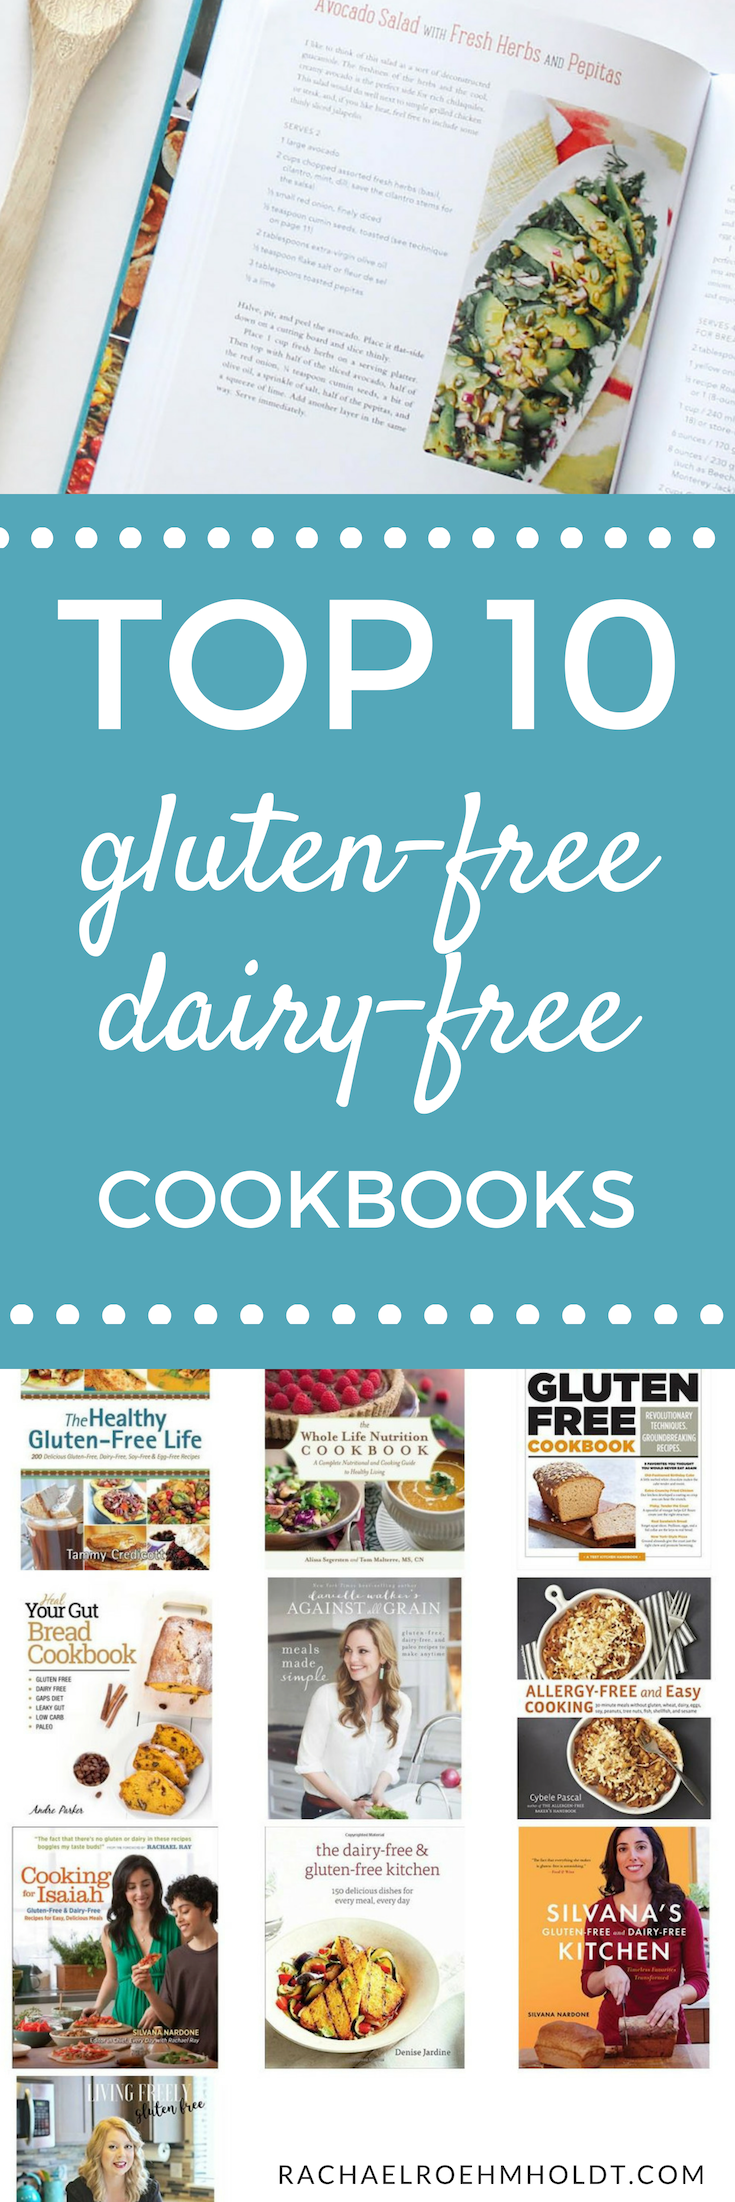 If you eat a gluten-free dairy-free diet, you're going to love these 10 cookbooks. With so many options, you're bound to find some amazing recipe inspiration to help you stick with this diet for the short and long-term.